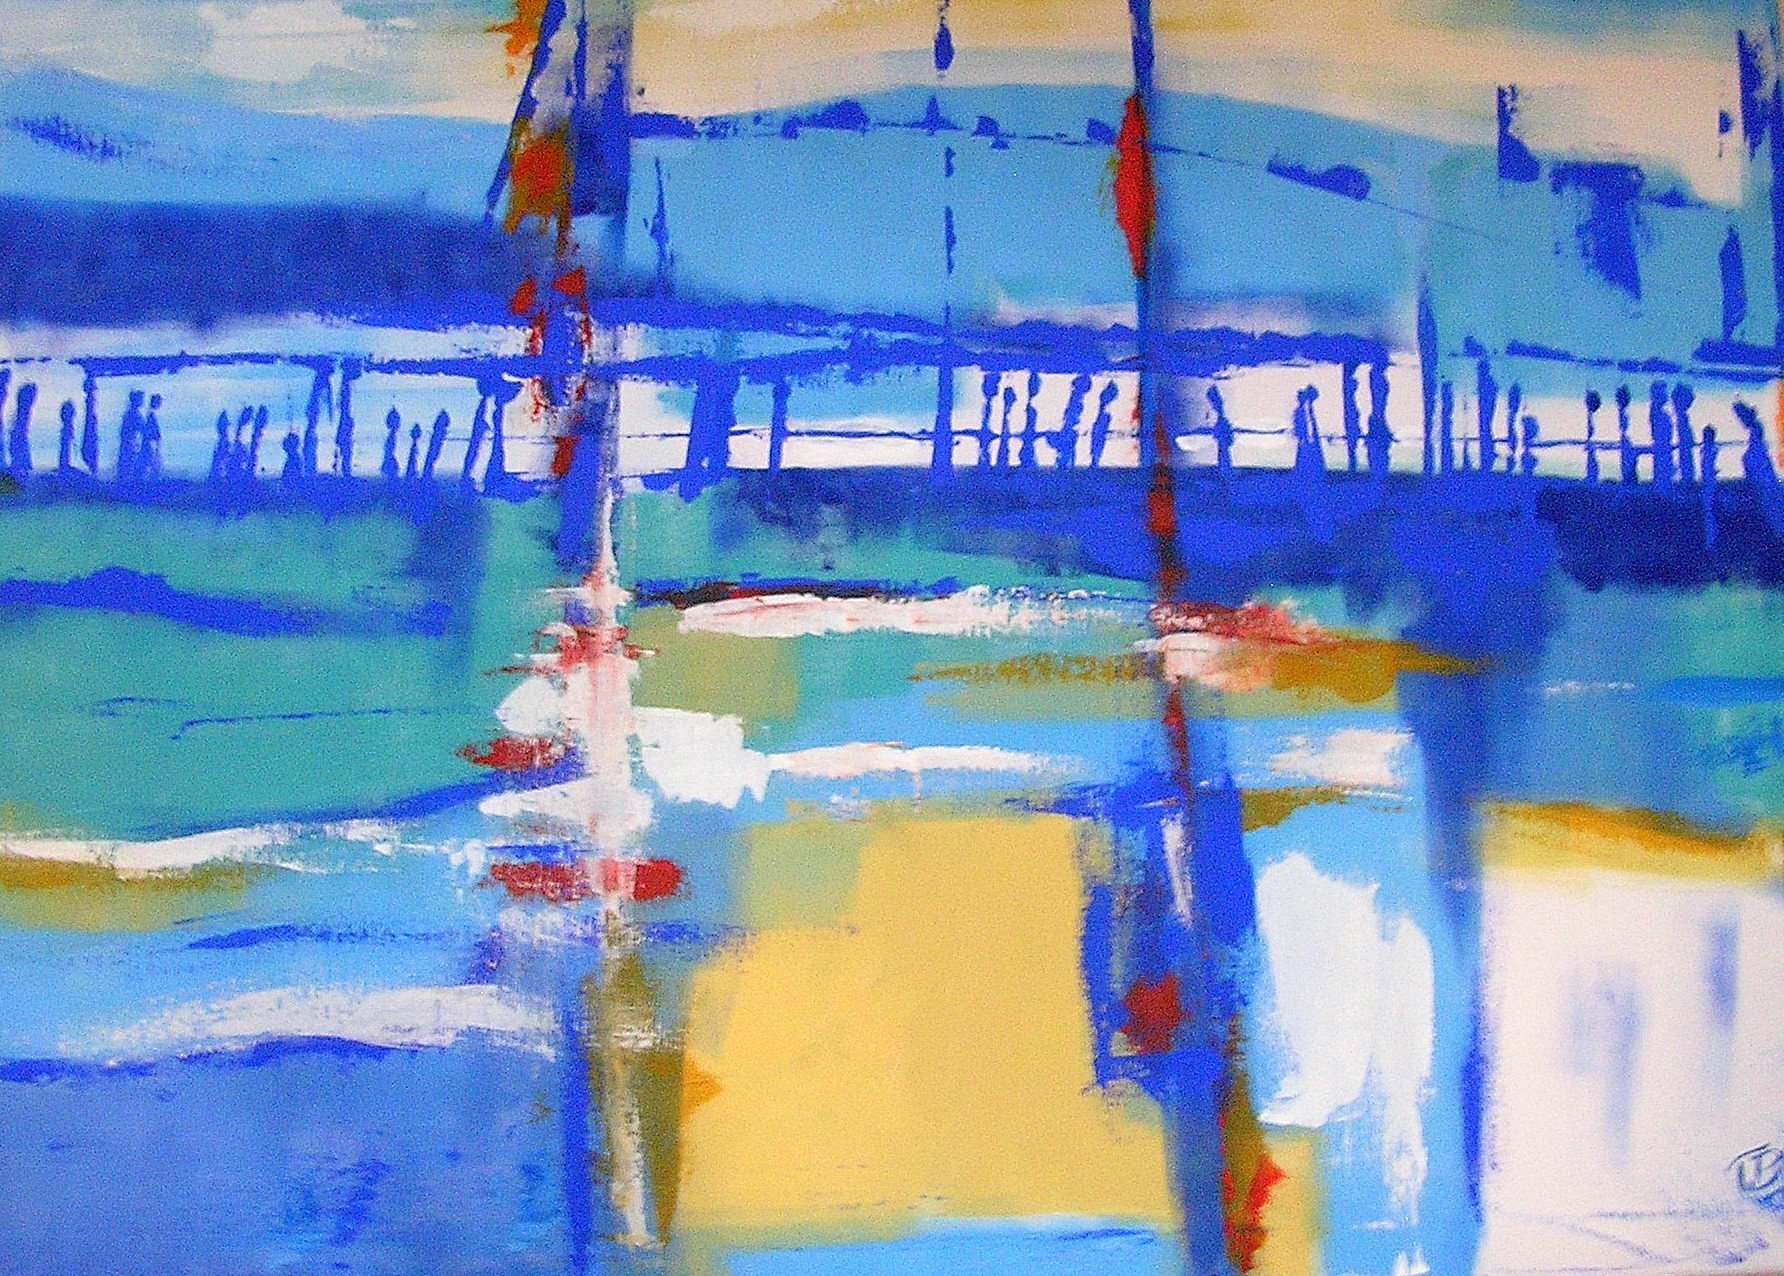 Tia Bley; The Pier, 2016, Original Painting Acrylic, 100 x 70 cm. Artwork description: 241 semiabstract. Dramatic clear colors, high depth, reduced shapes. ...